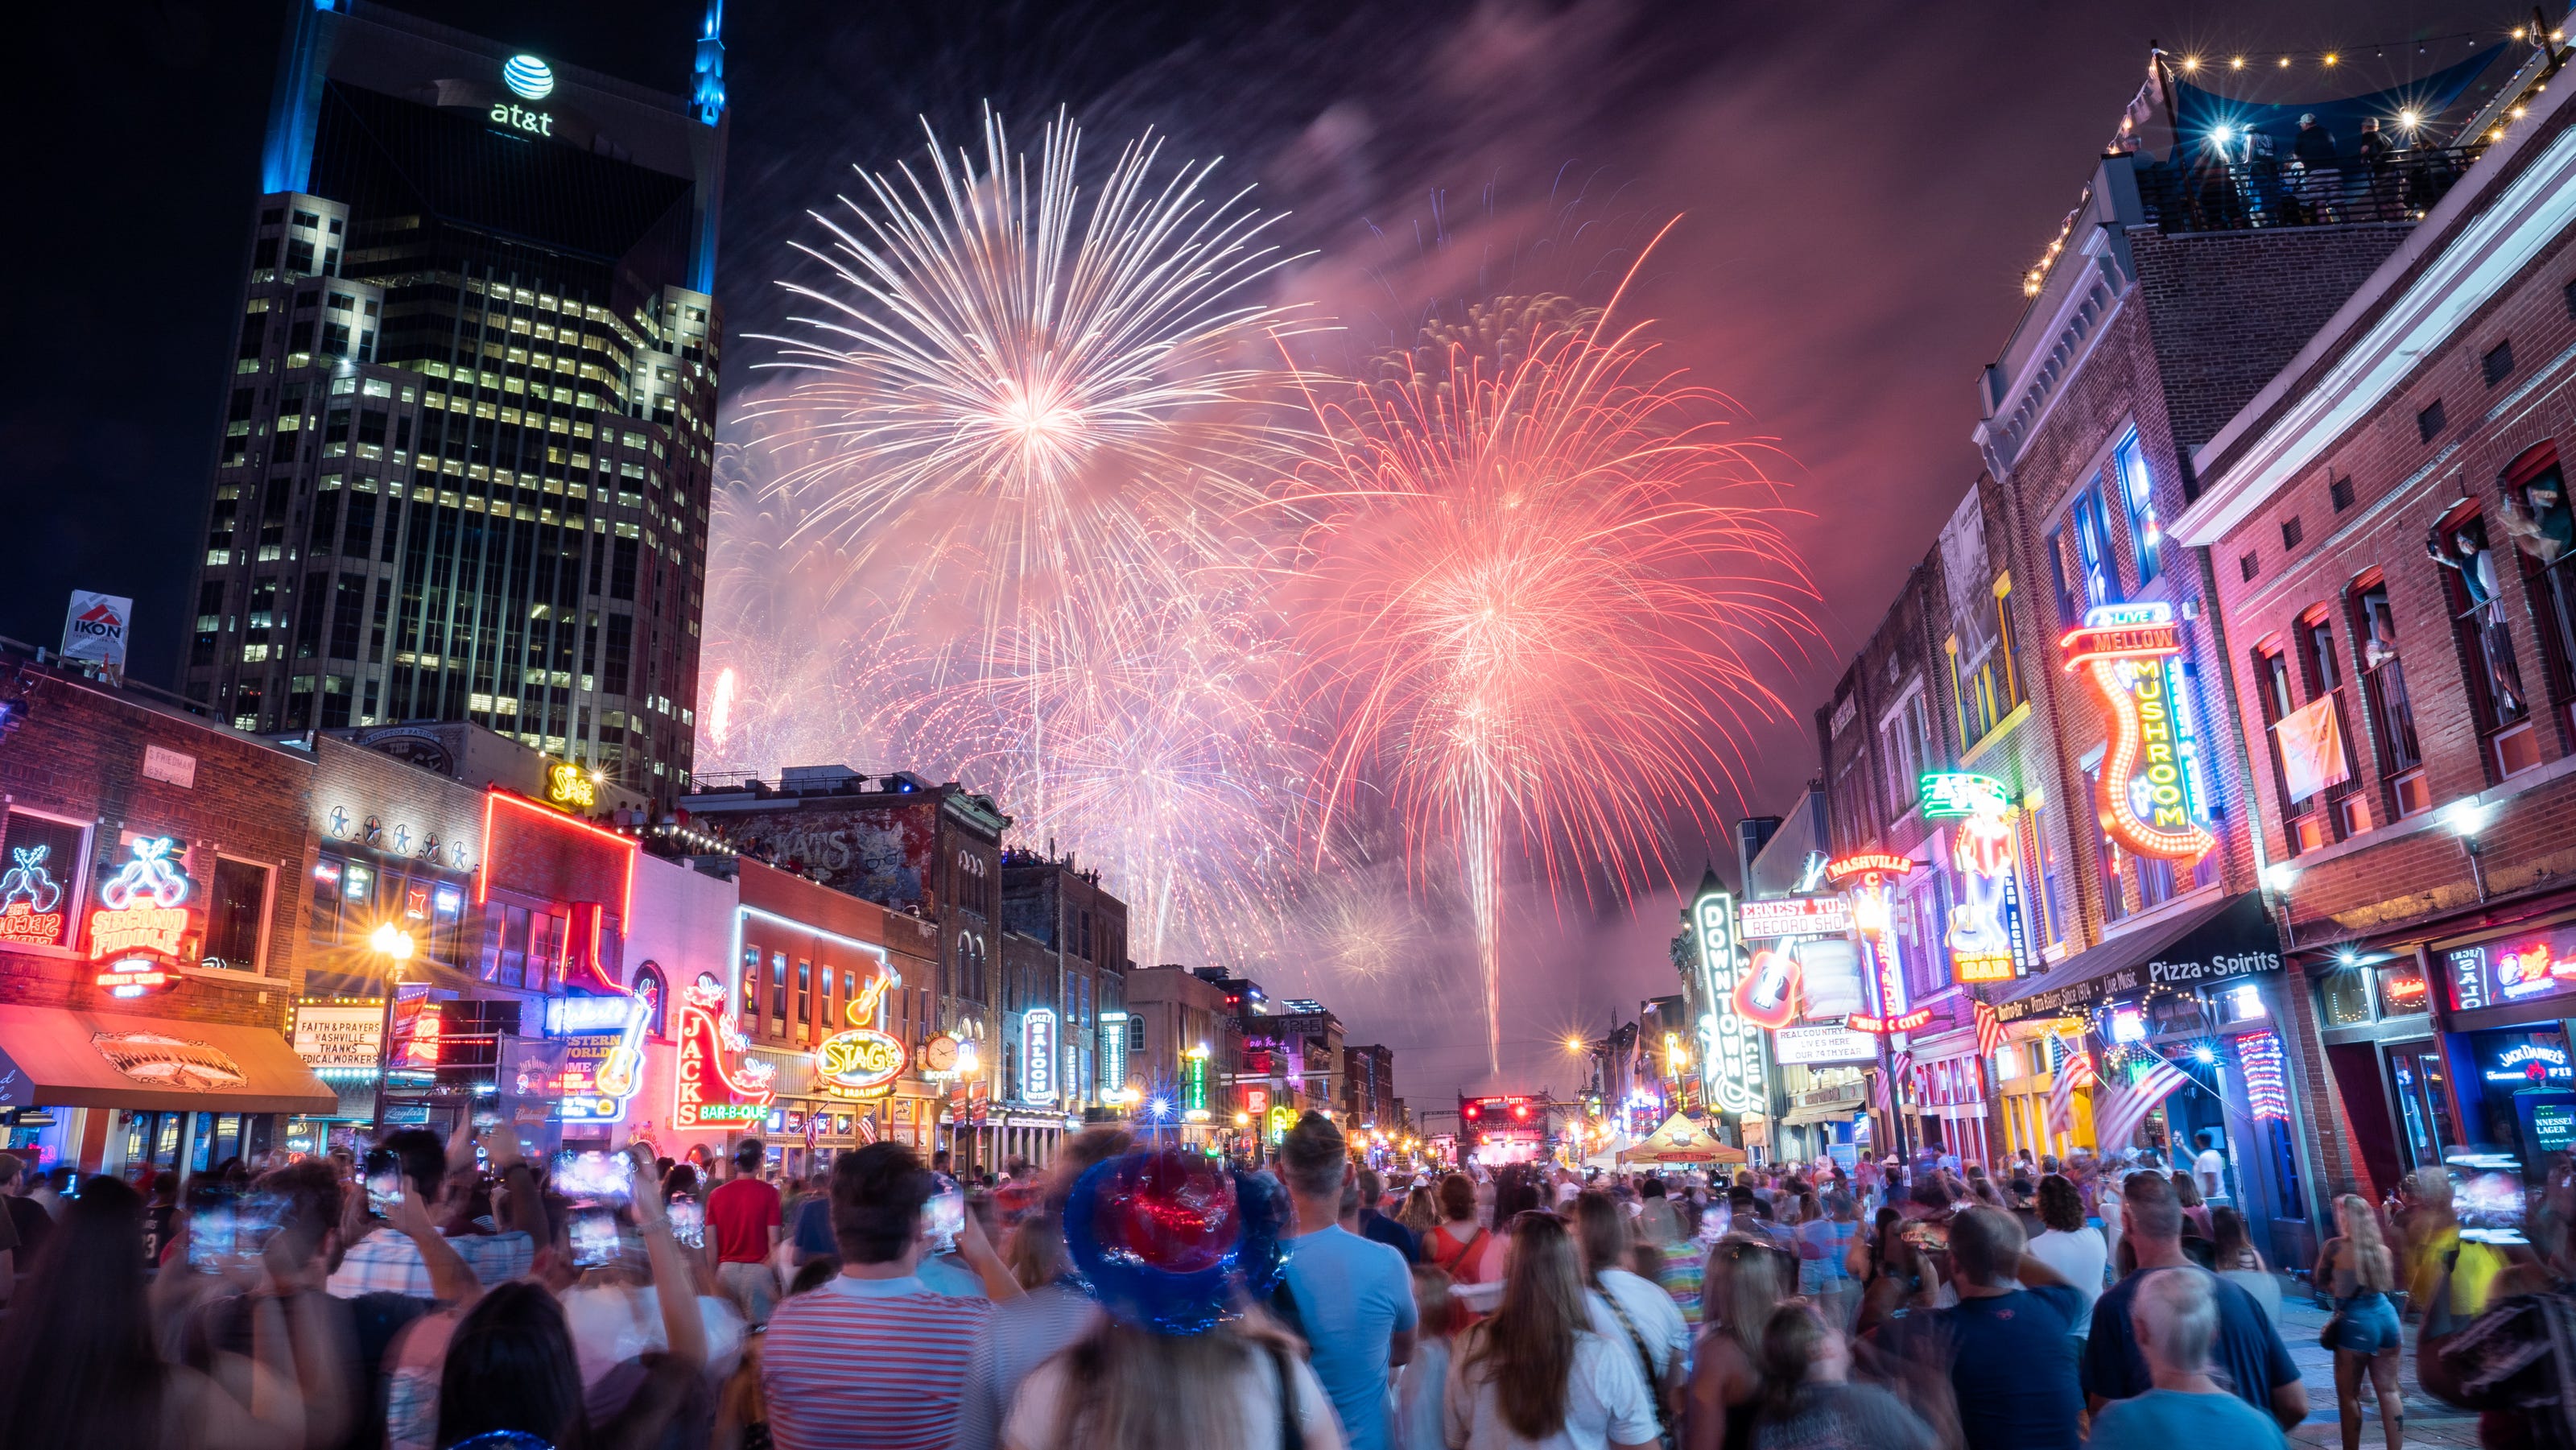 Brad Paisley headlines a recordbreaking 4th of July in Nashville